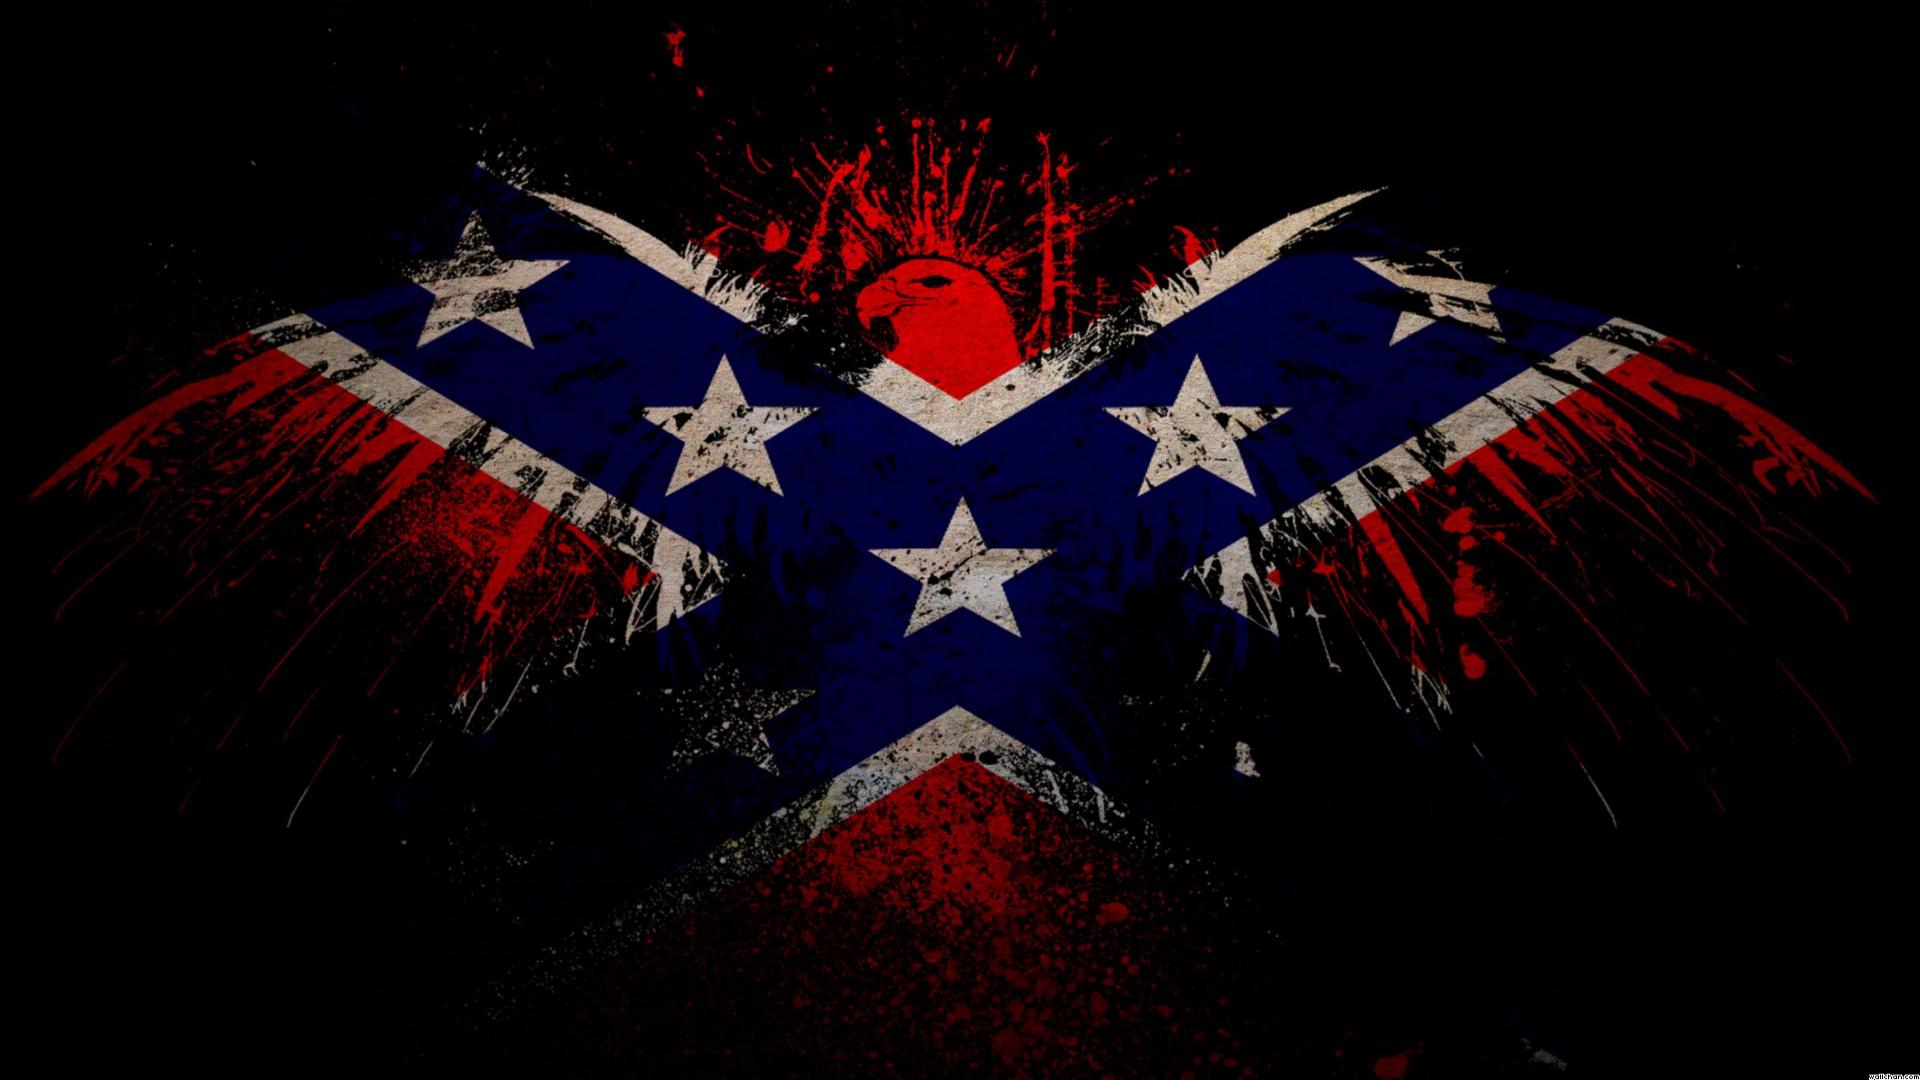 Confederate States of America Flag Wallpaper   MixHD wallpapers 1920x1080